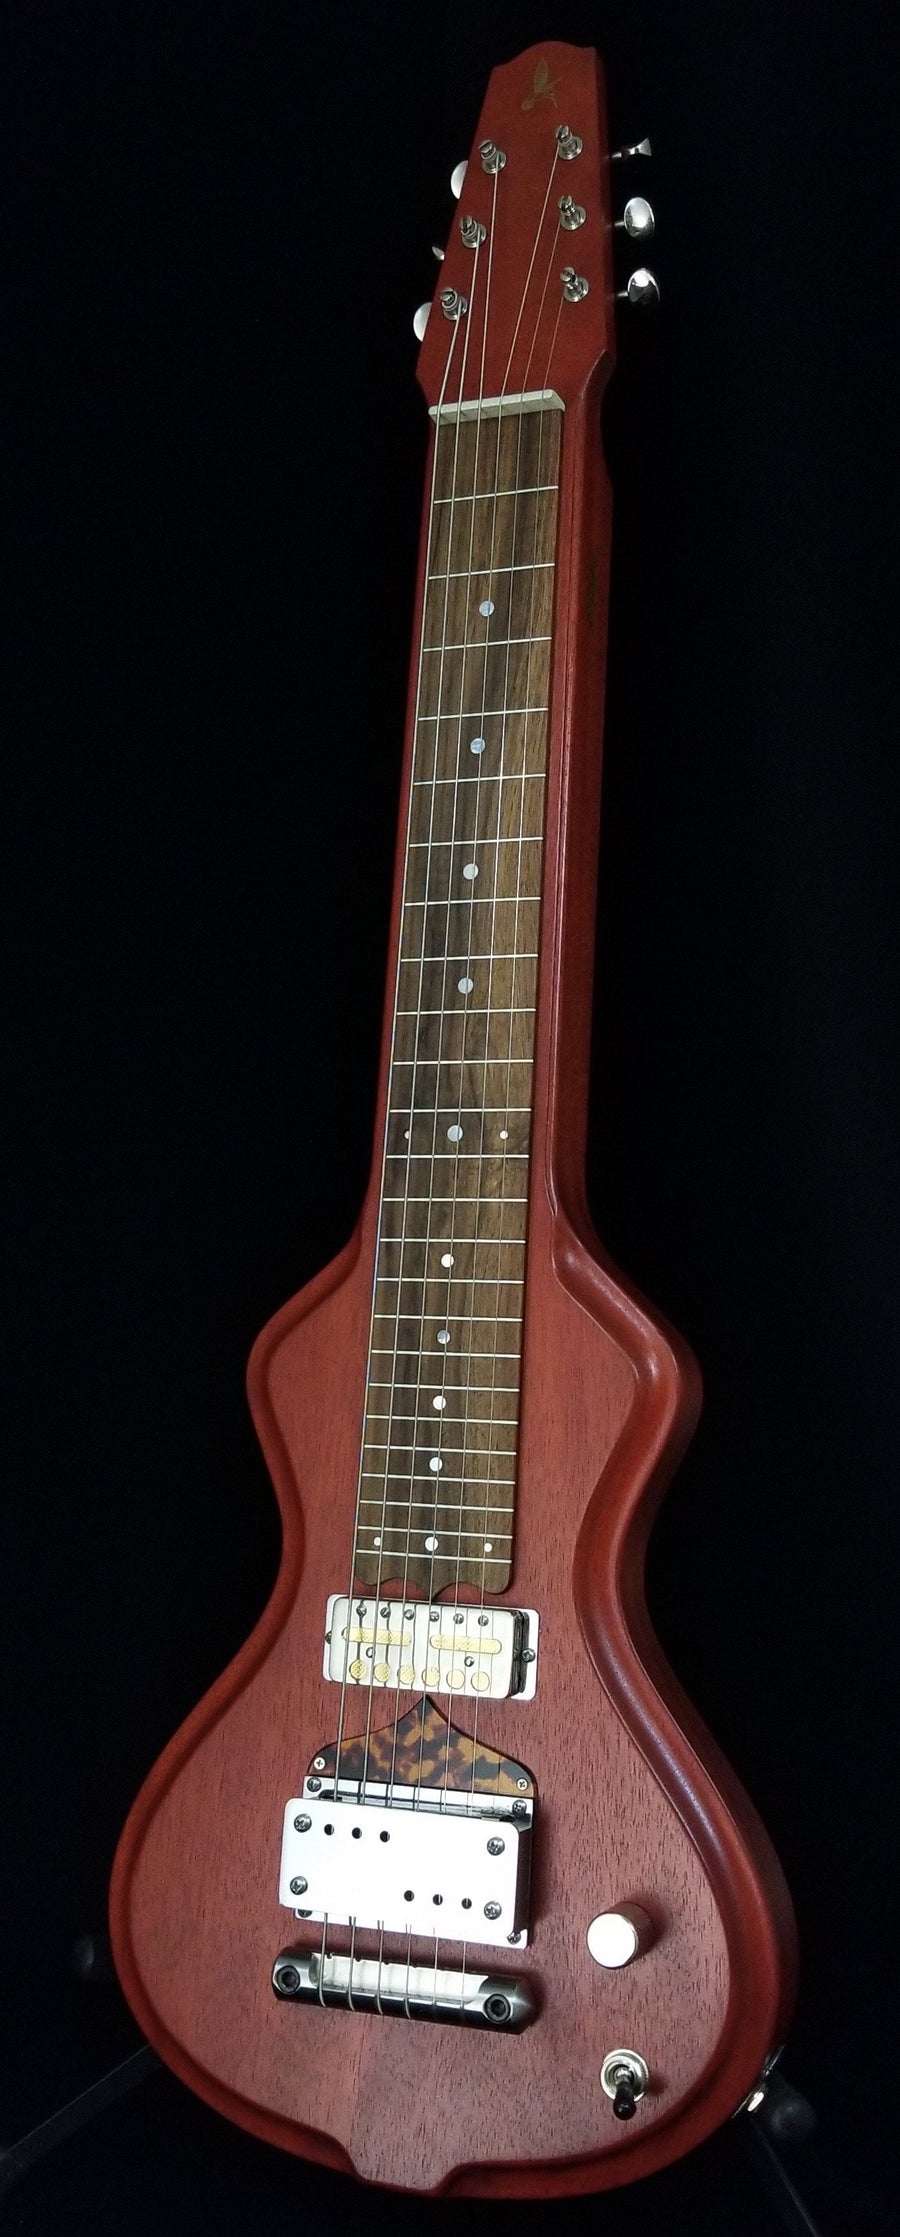 SOLD 2018 Electro Hawaiian Short Scale 6-String Lap Steel Played by Greg Leisz, #1068